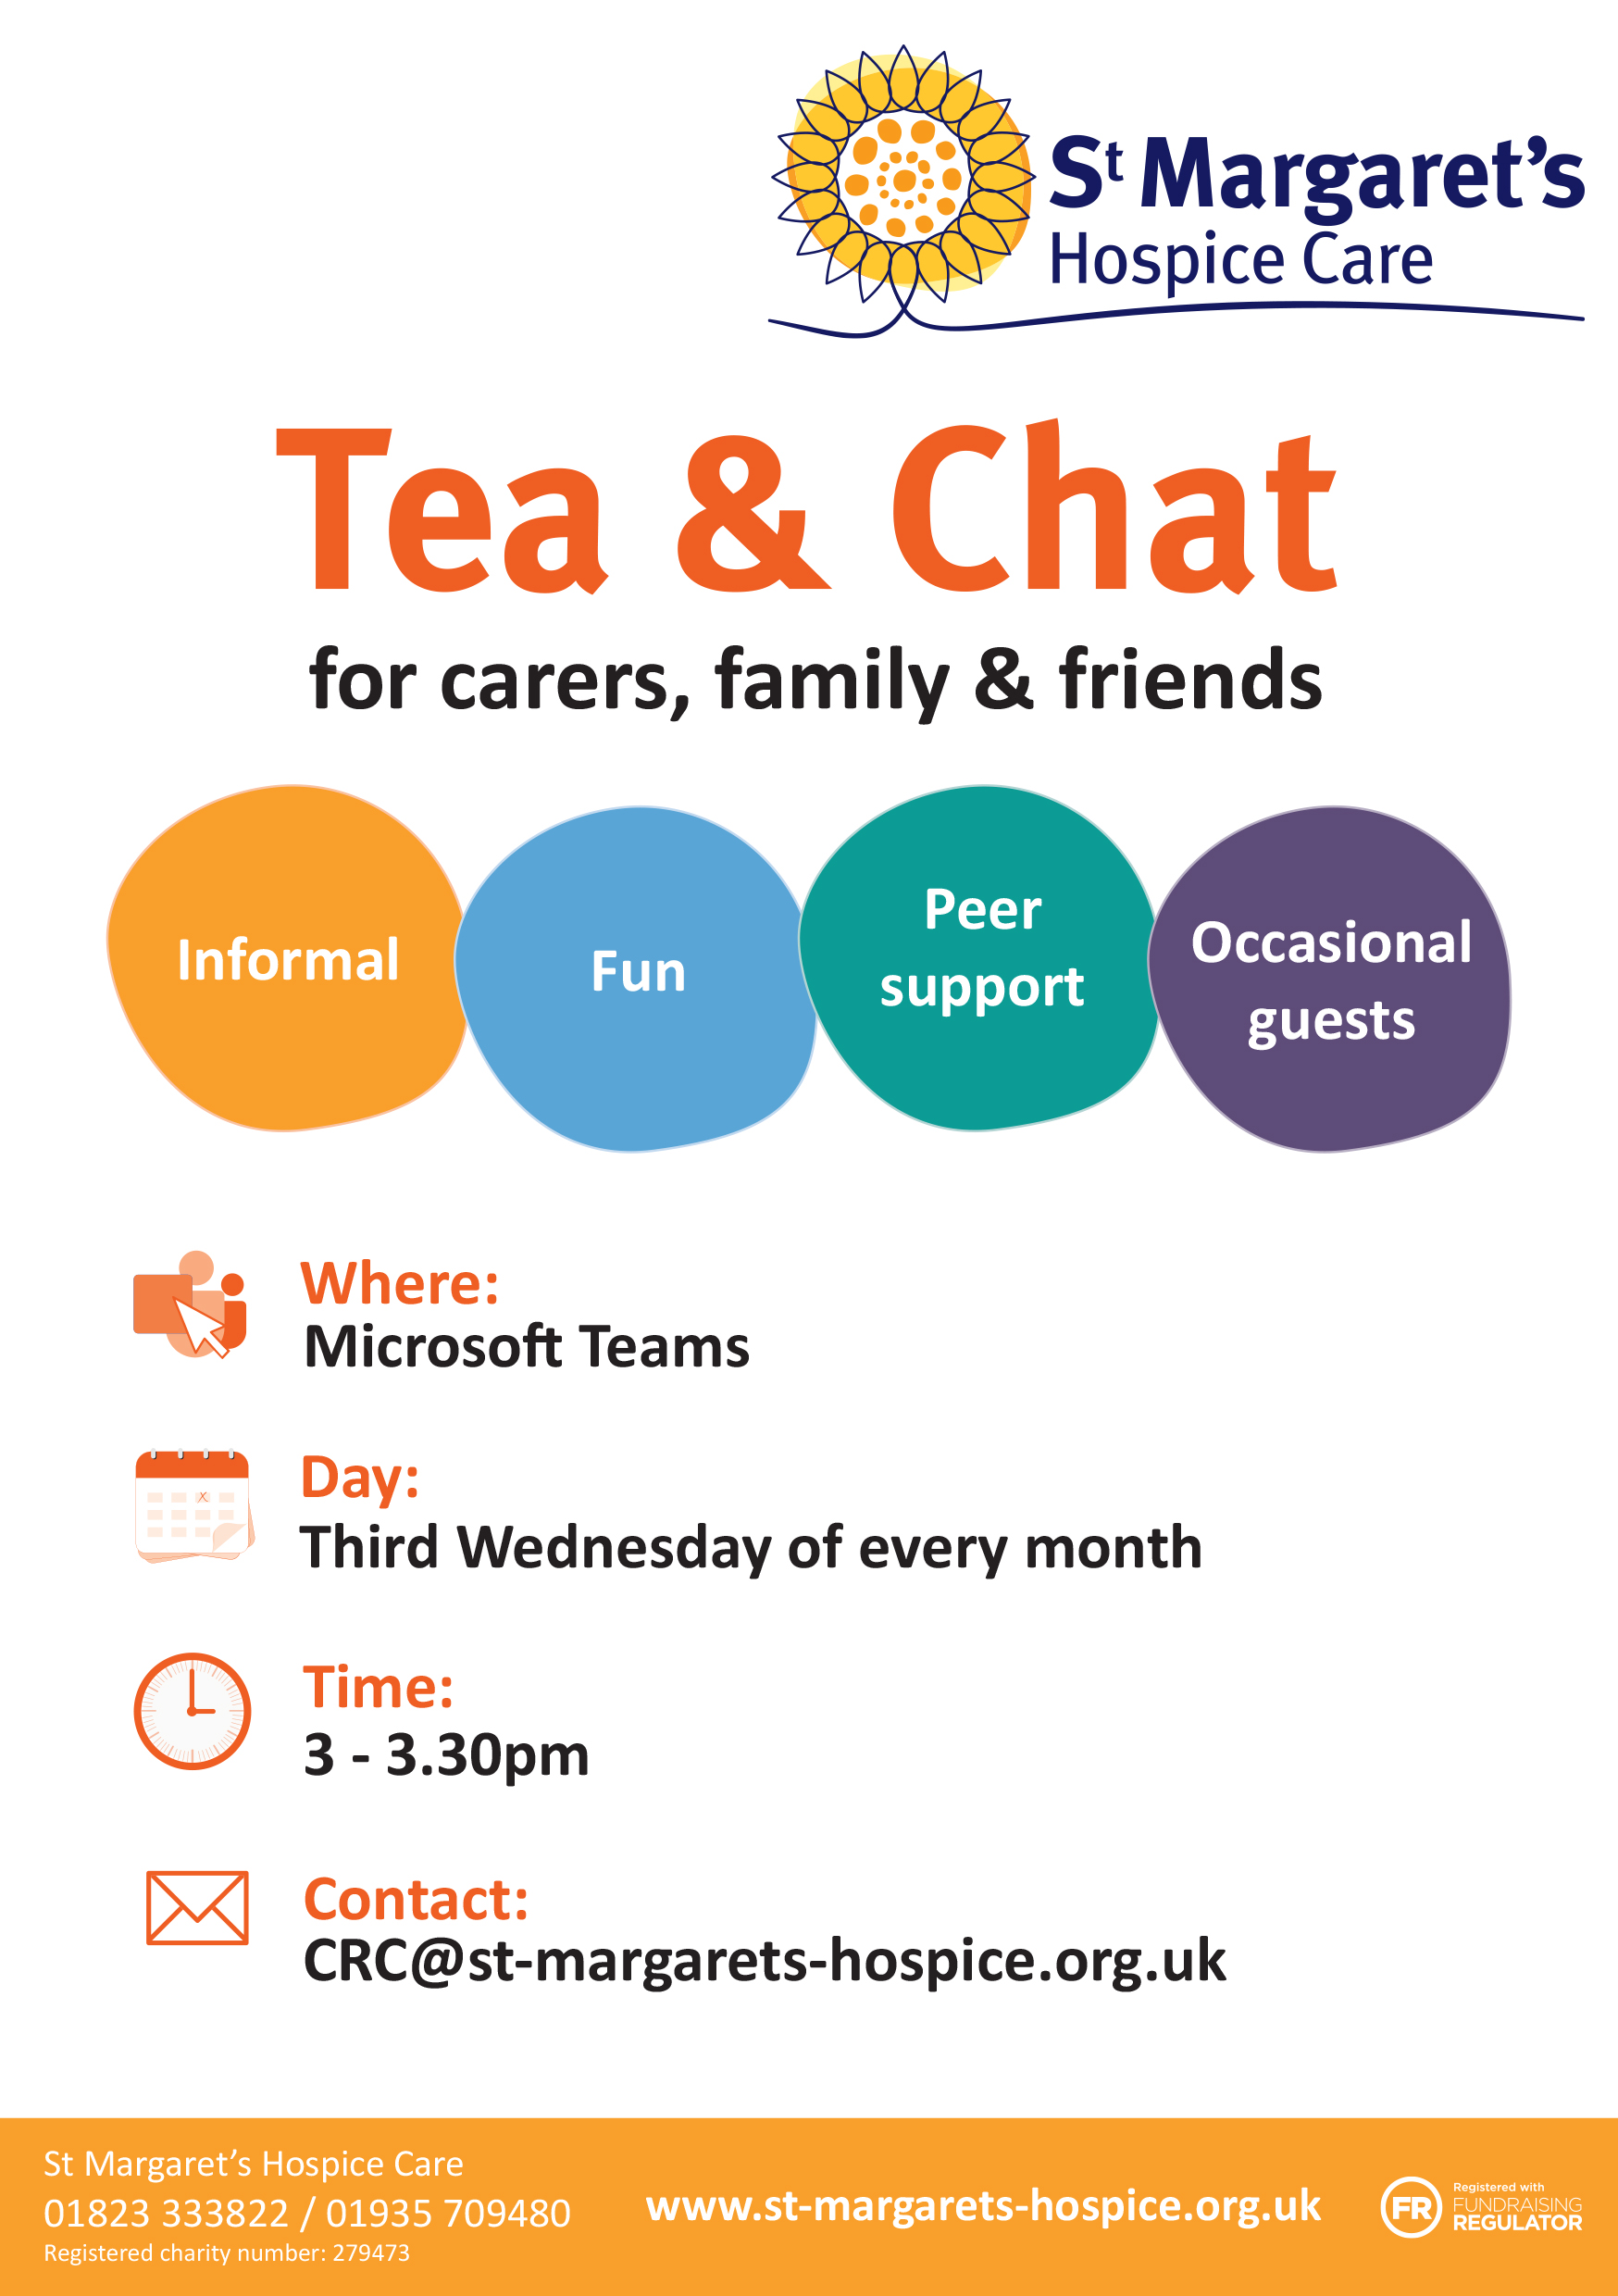 tea and char for carers, family and friends